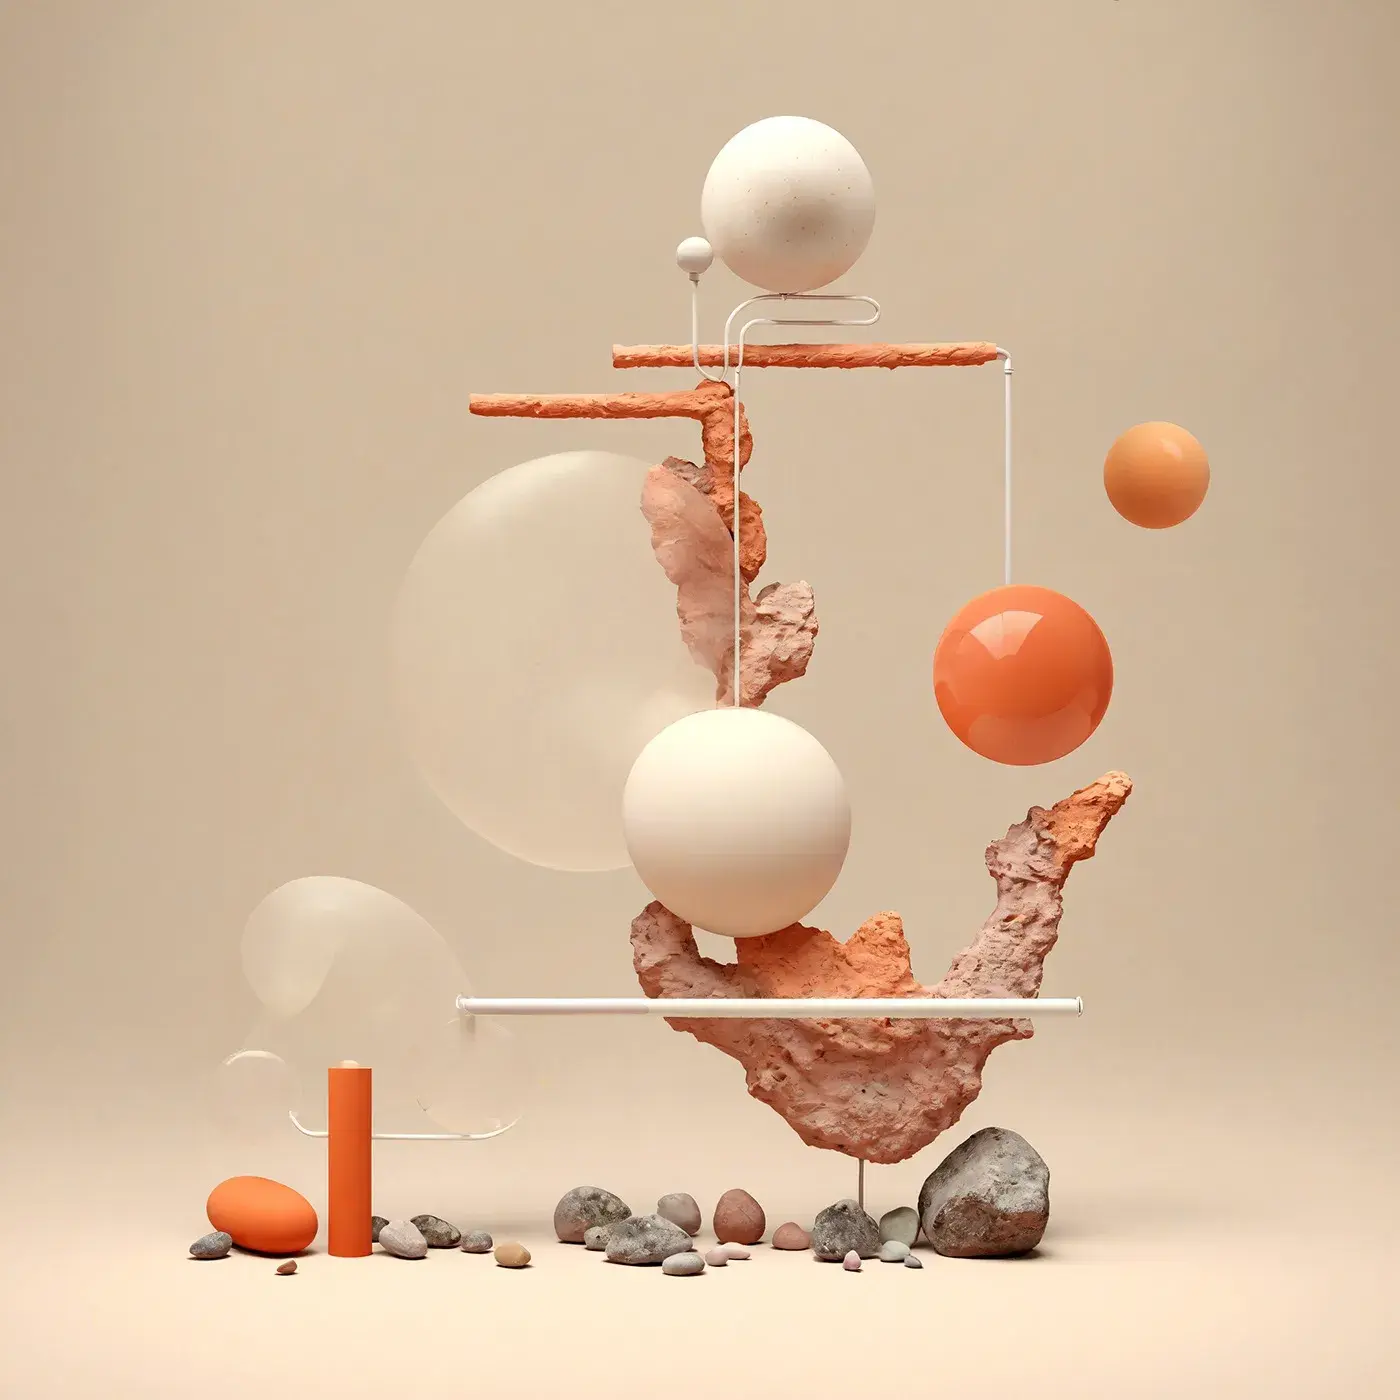 Abstract Nature: A Journey Through 3D Illustration